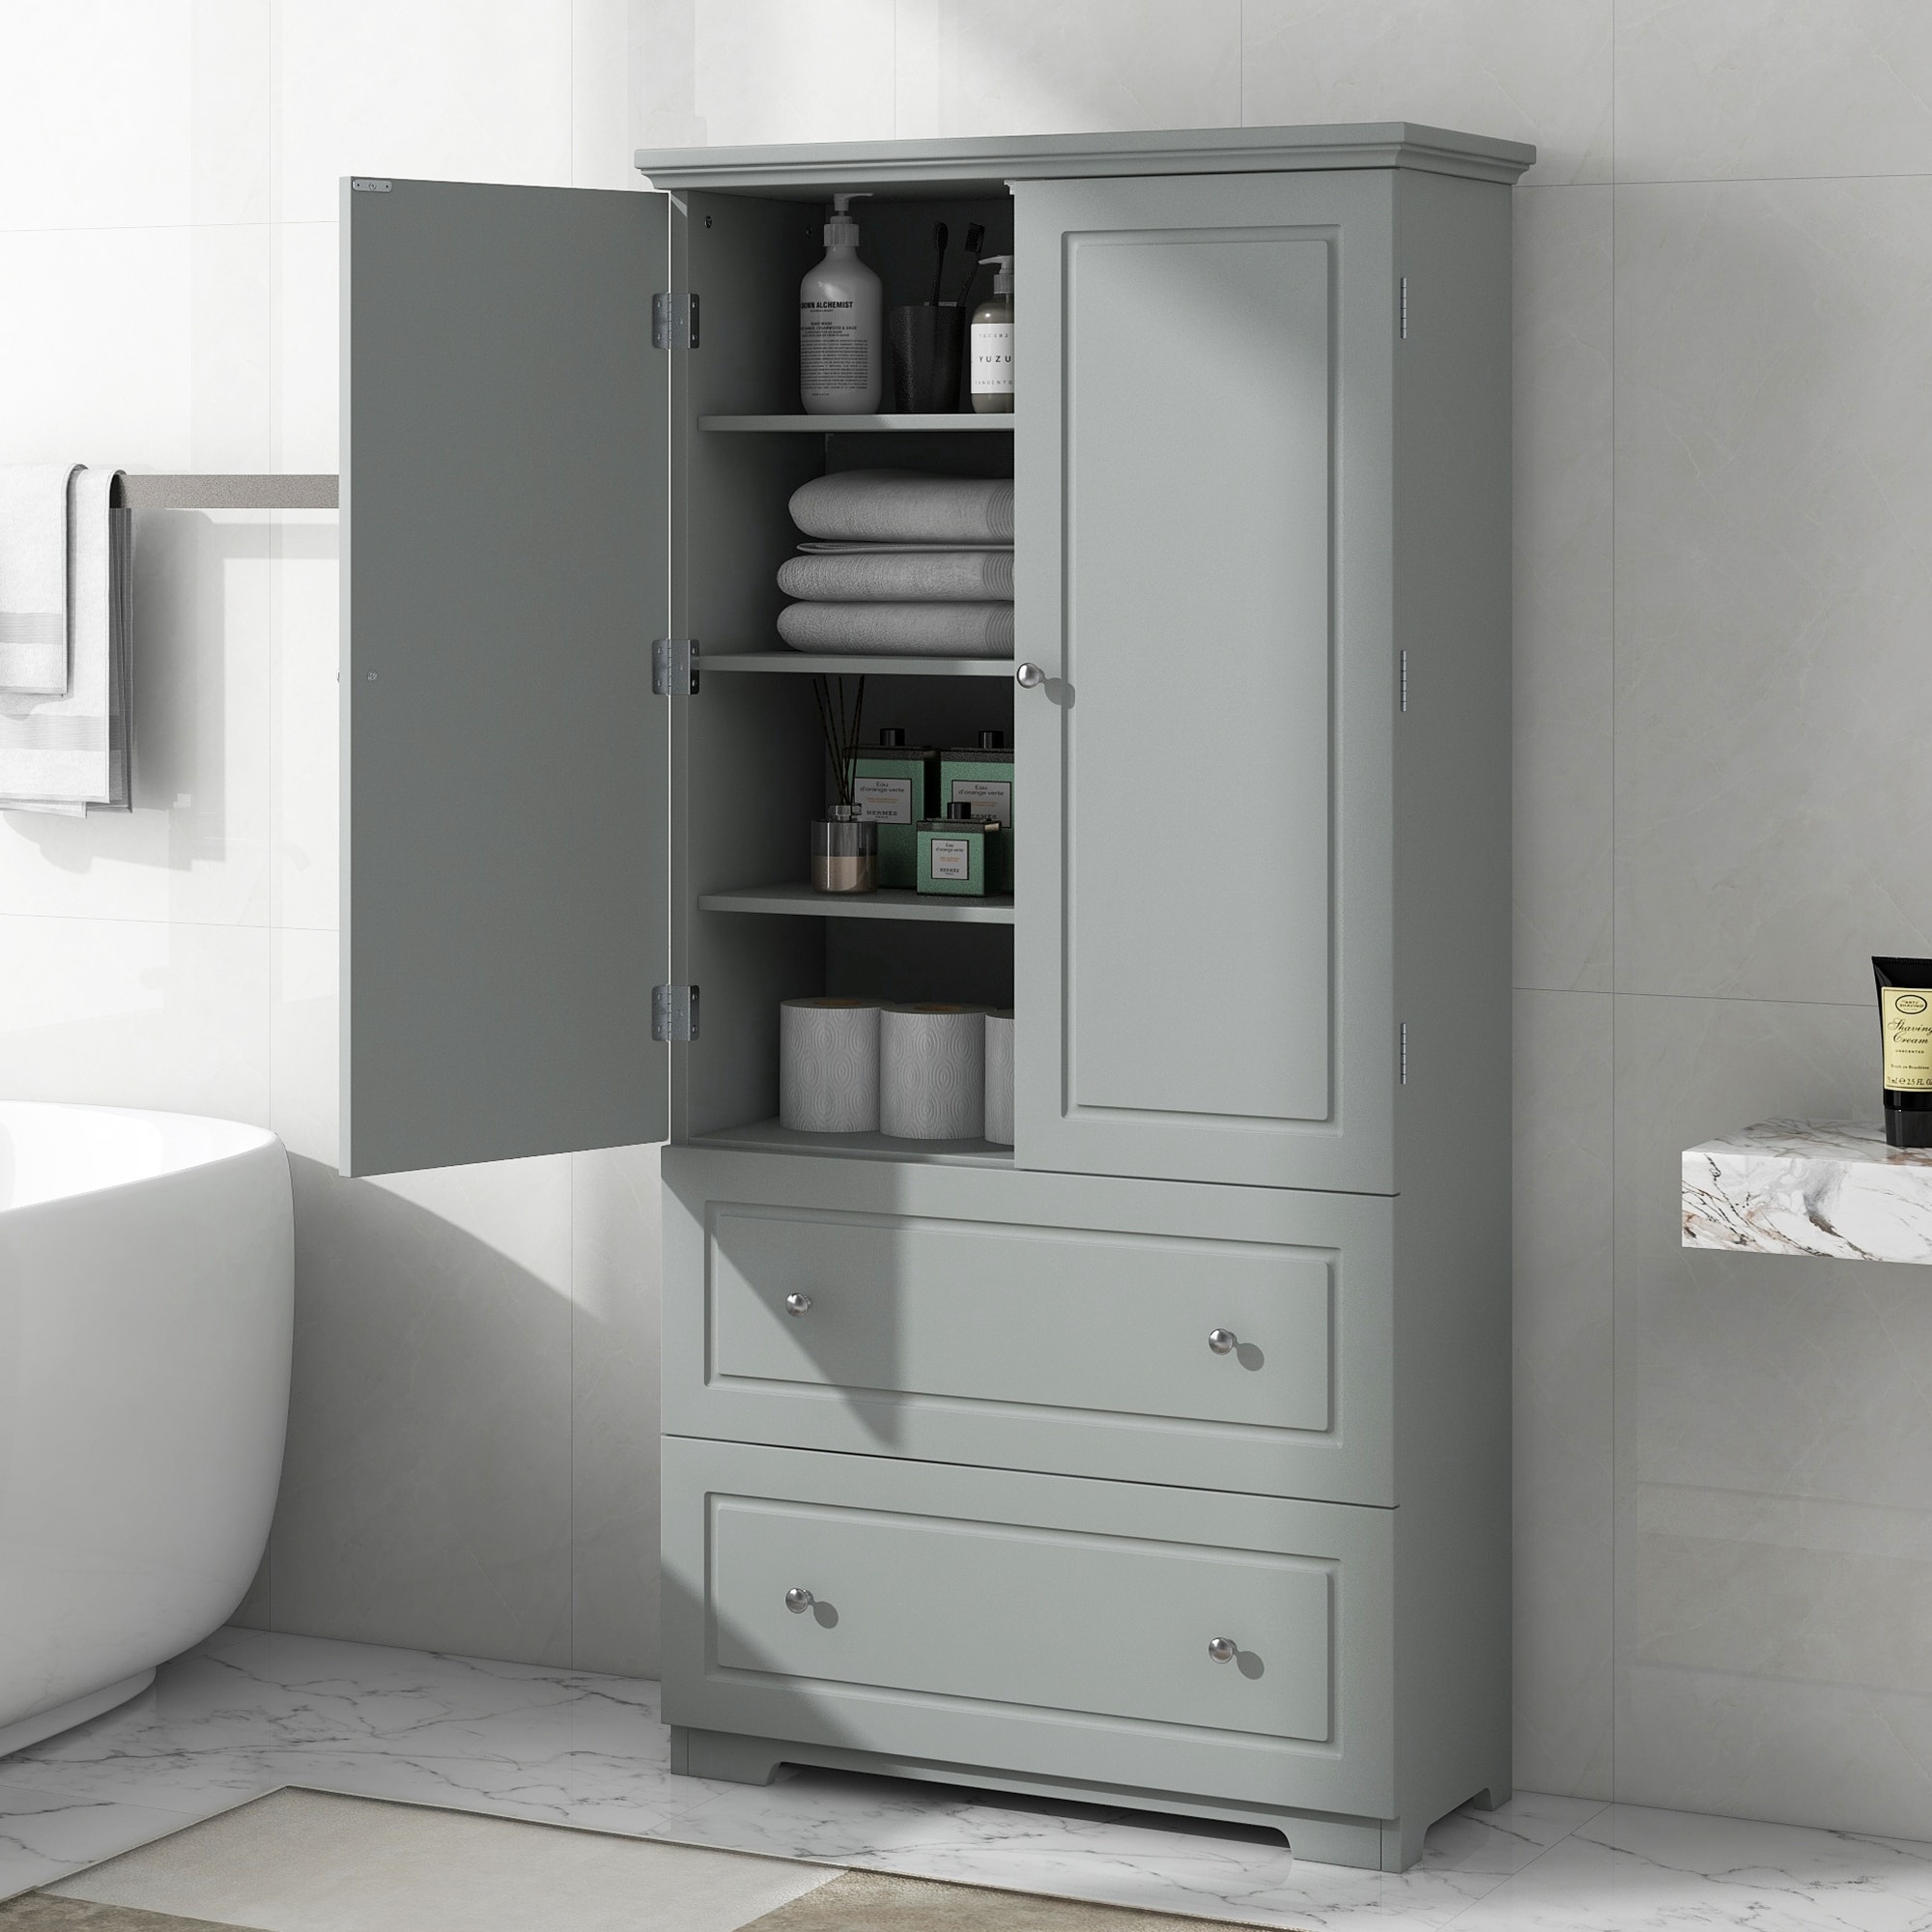 https://ak1.ostkcdn.com/images/products/is/images/direct/728a3f6eb9b72d69b47f9b40f7c9c2e858e935b8/Wide-Bathroom-Storage-Cabinet%2C-Freestanding-Storage-Cabinet-with-Two-Drawers-and-Adjustable-Shelf%2C-MDF-Board-with-Painted-Finish.jpg